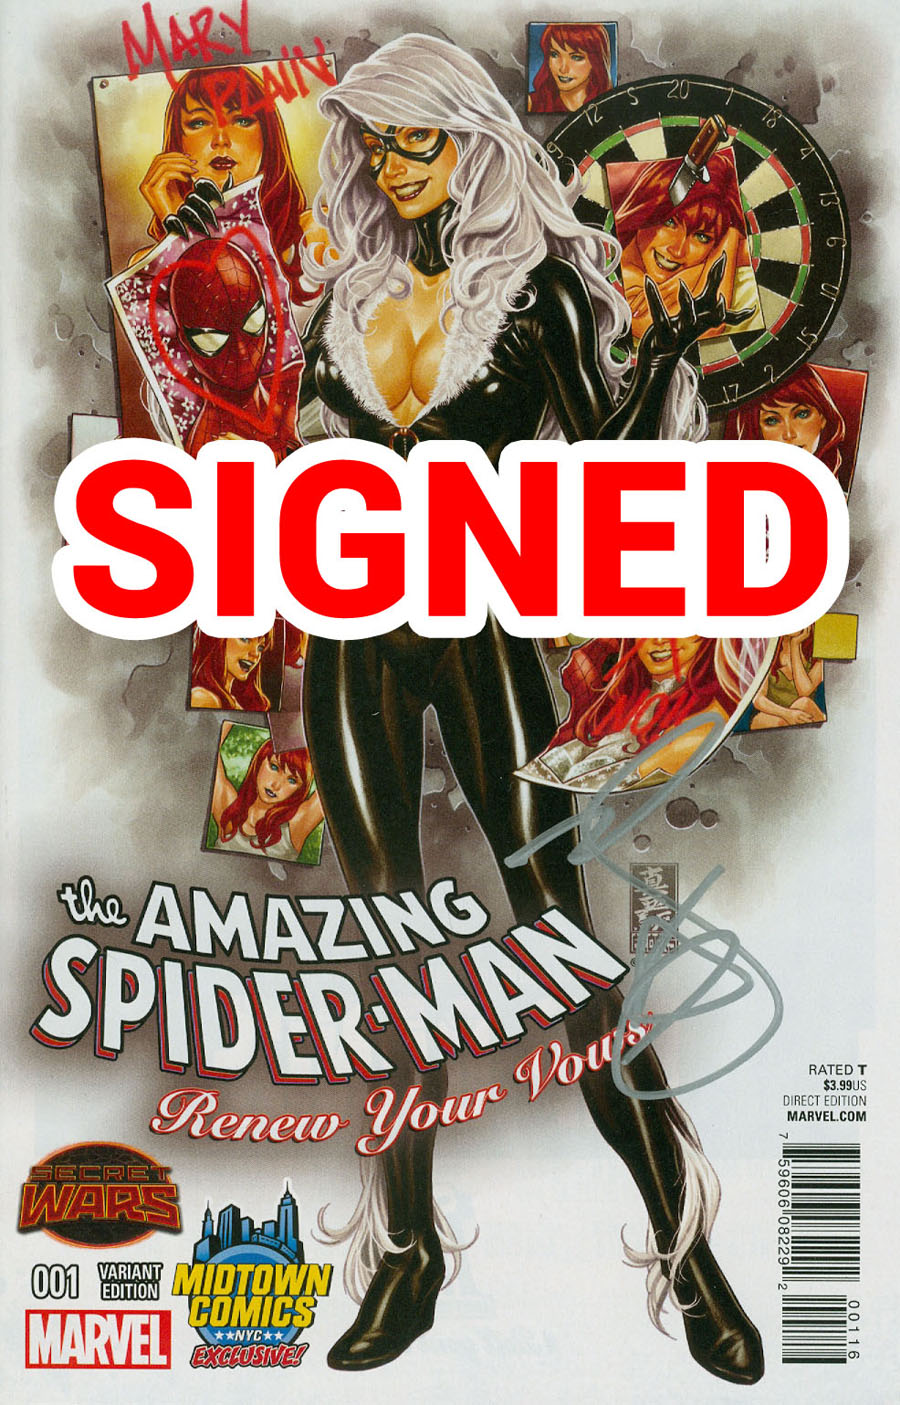 Amazing Spider-Man Renew Your Vows #1 Cover N Midtown Exclusive Mark Brooks Variant Cover Signed By Mark Brooks (Secret Wars Warzones Tie-In)